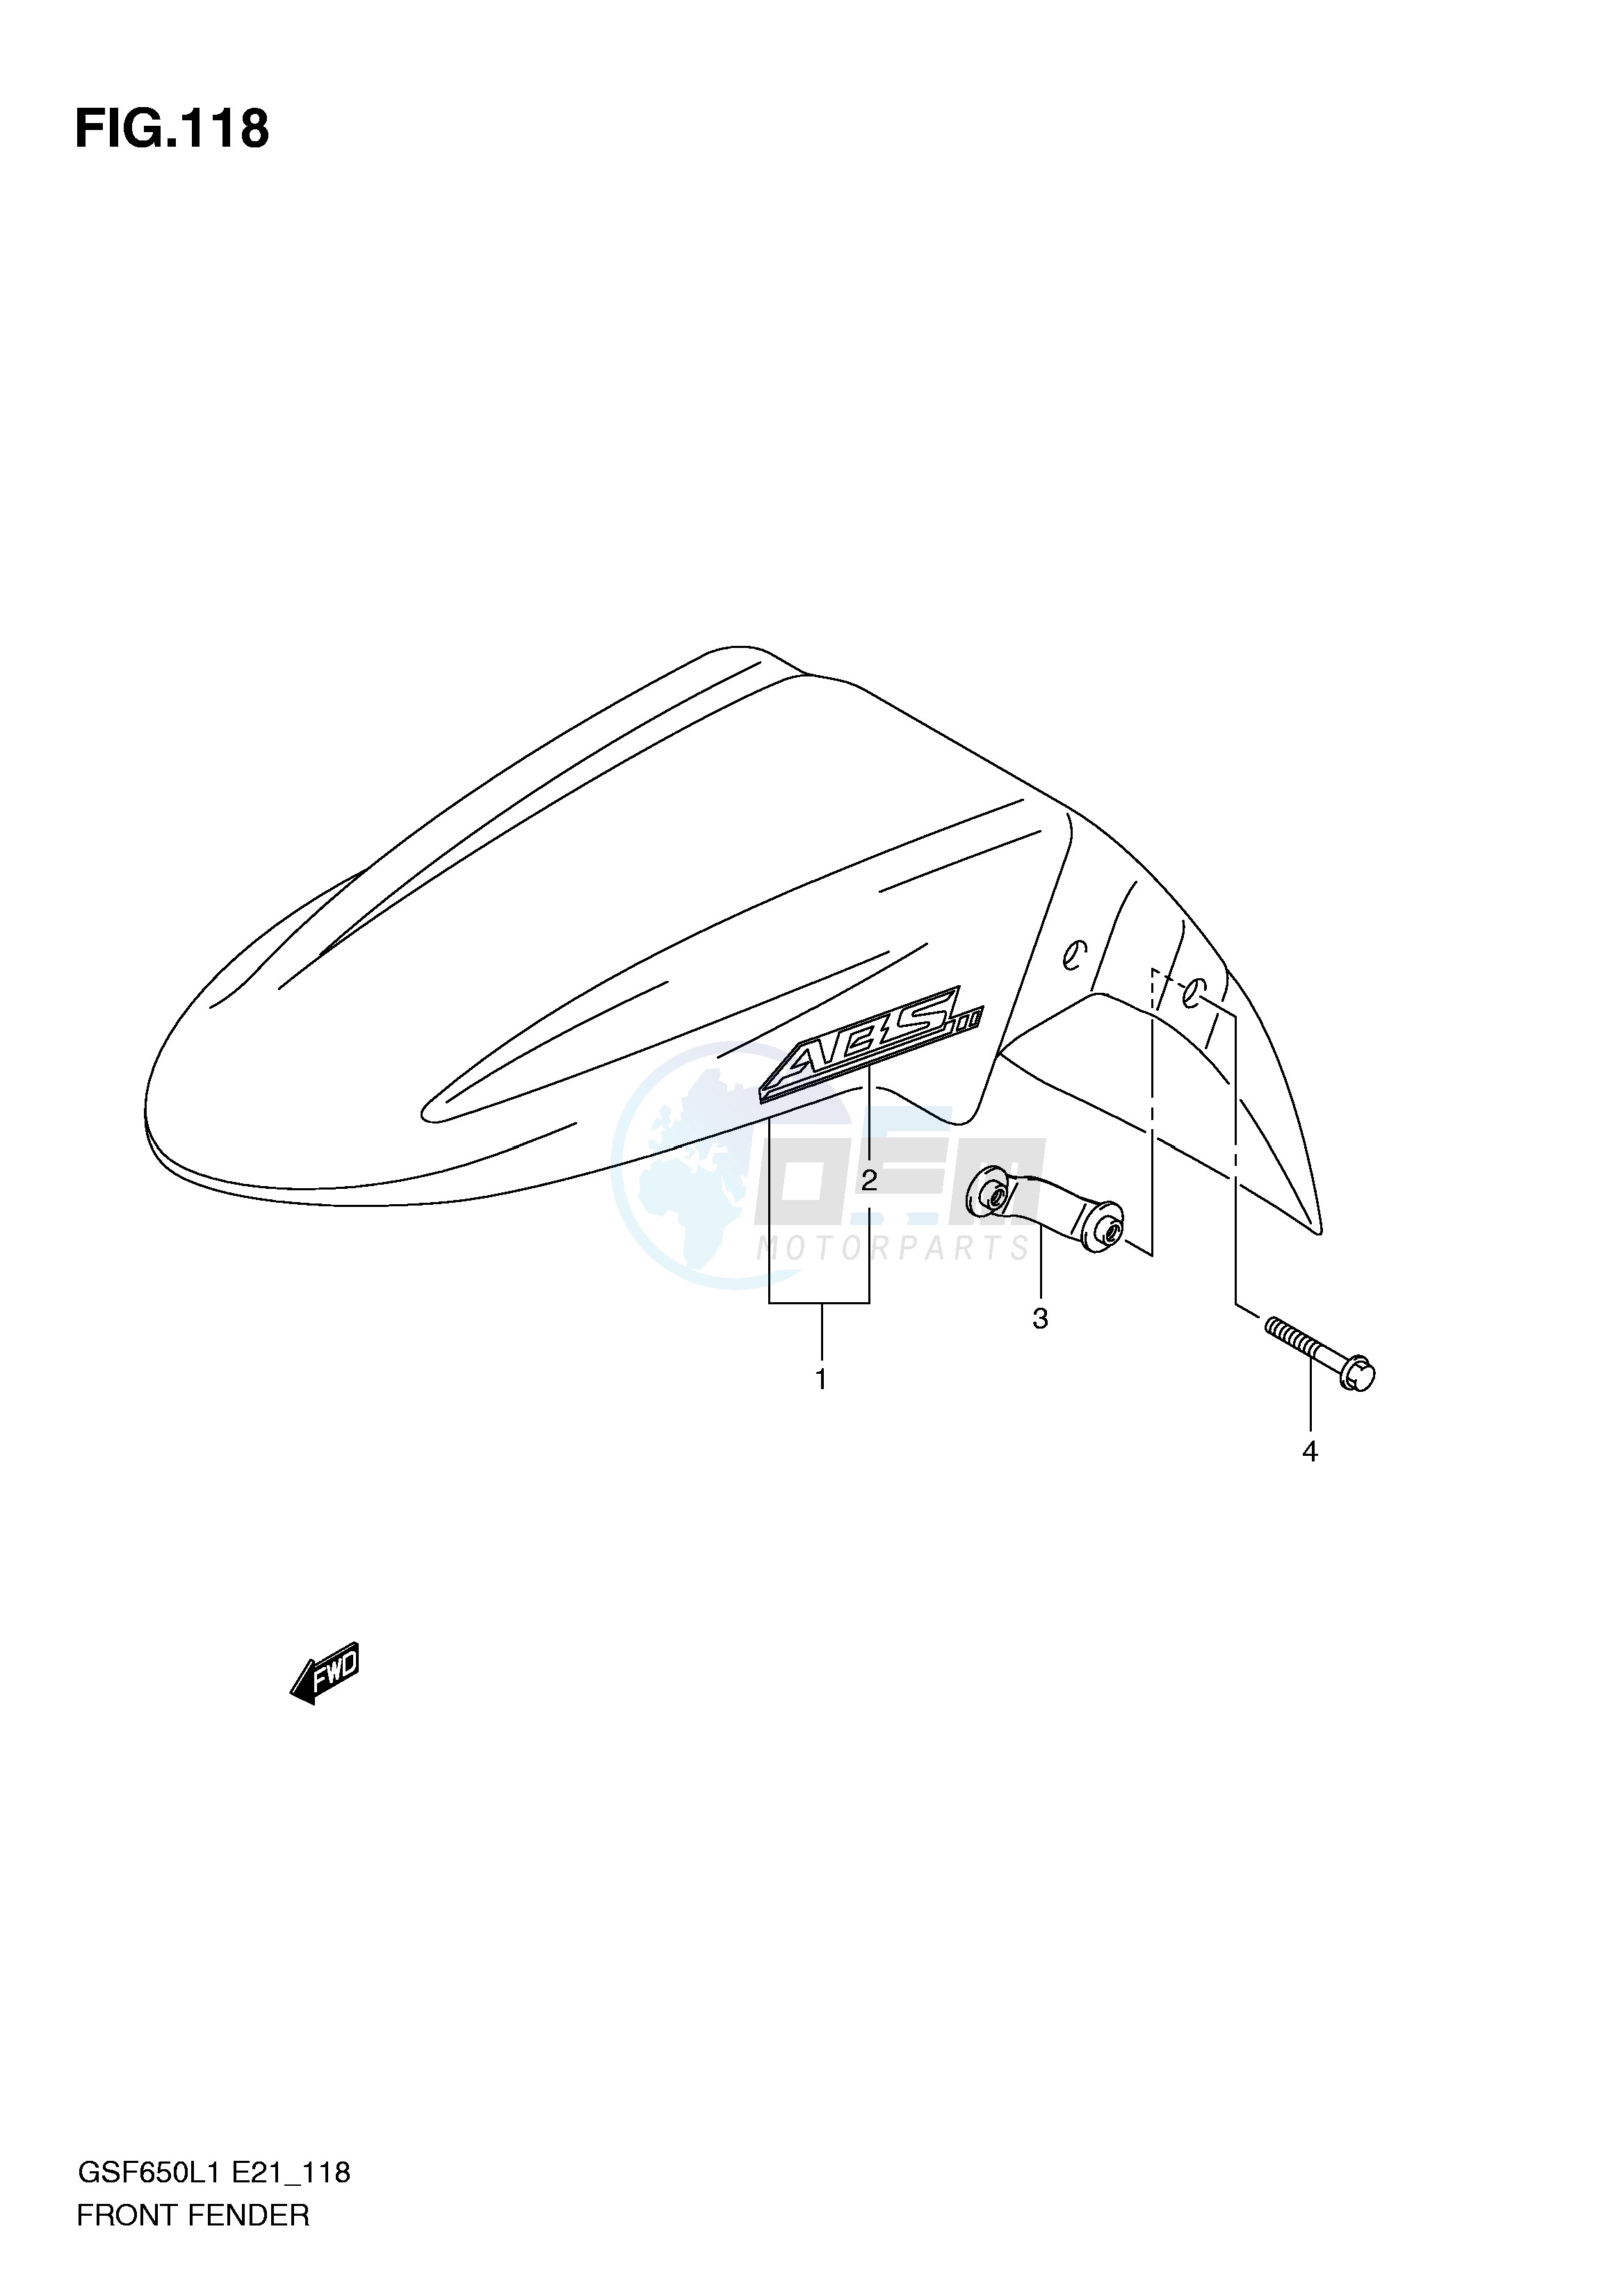 FRONT FENDER (GSF650SUAL1 E21) image